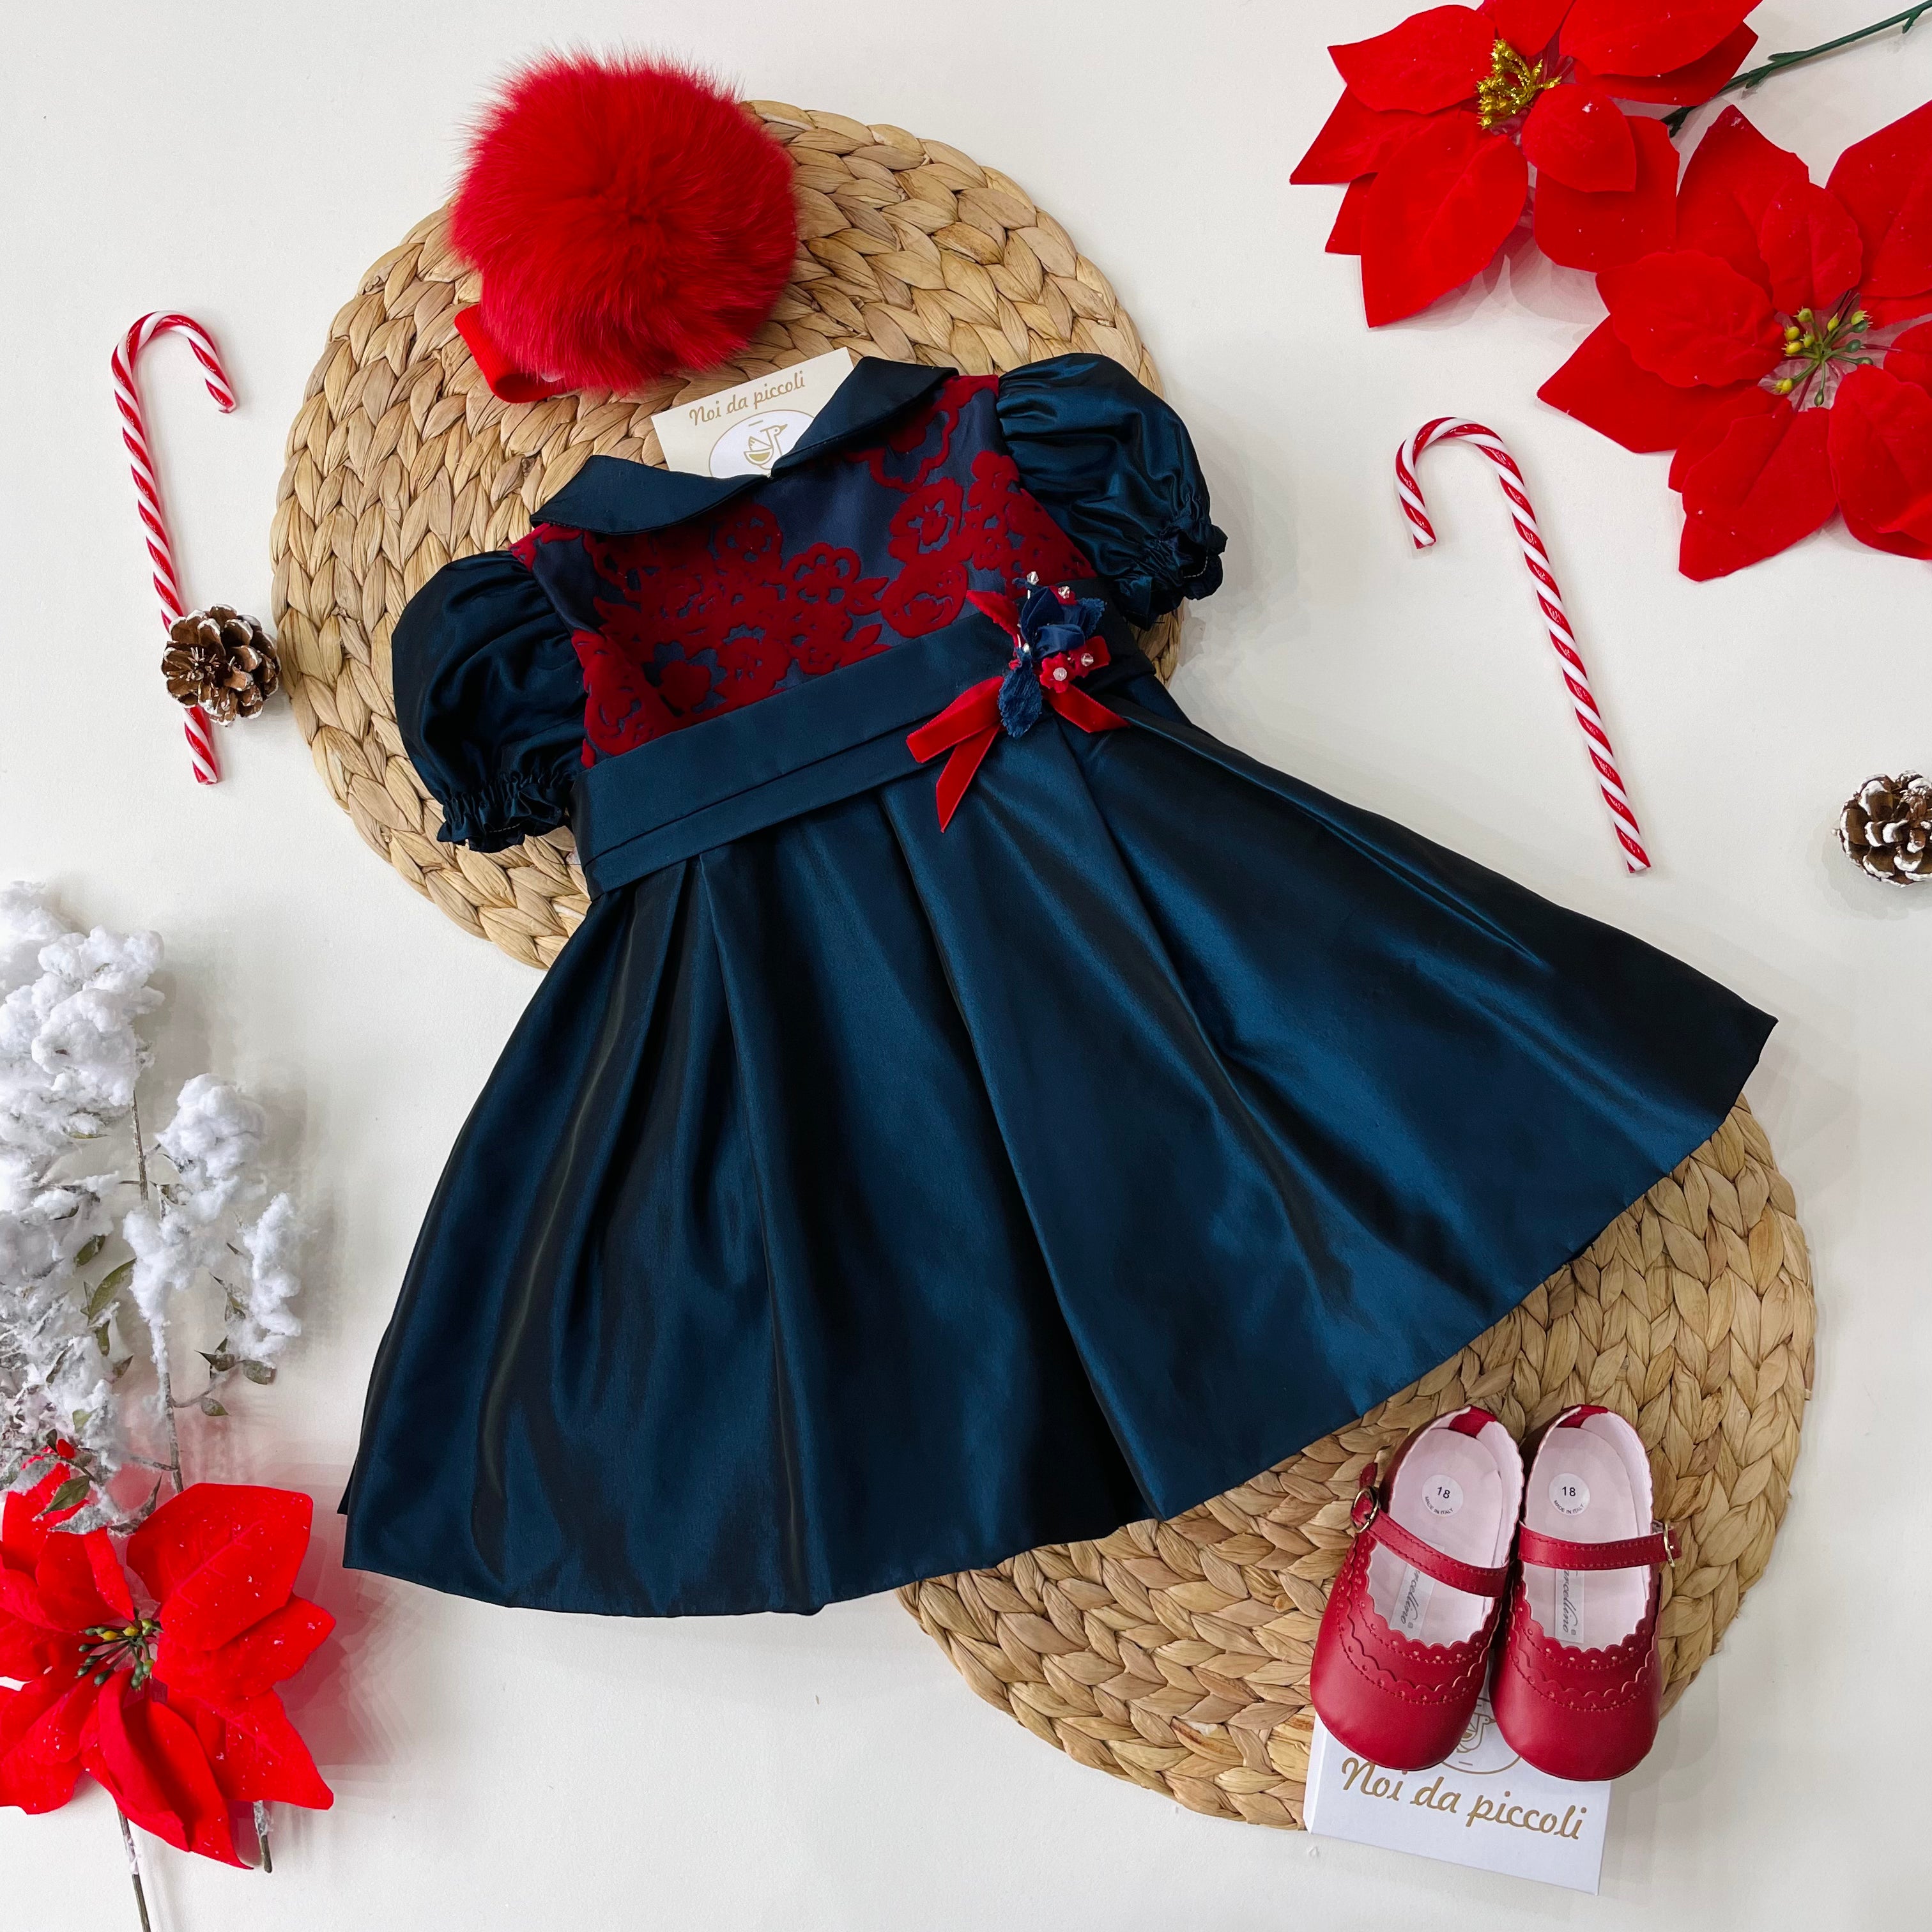 BLUE DRESS AND RED DETAILS